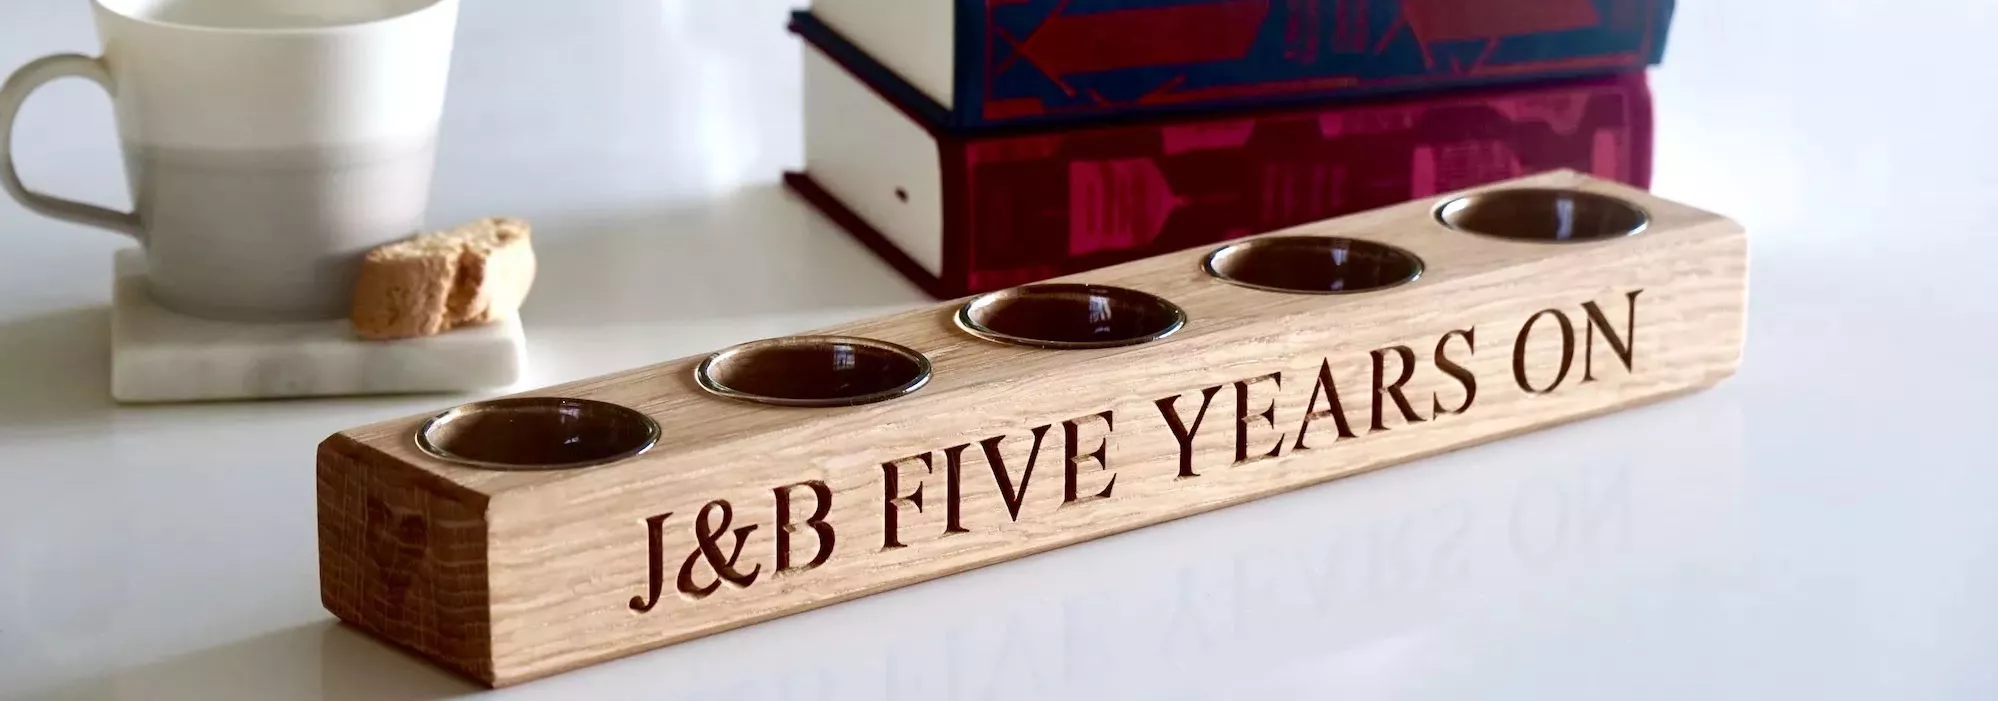 5 Year Anniversary Gift for Him, Wood Anniversary Gift for Him, 5th  Anniversary Gift for Him, Wood Gifts for Men, Personalized Anniversary 